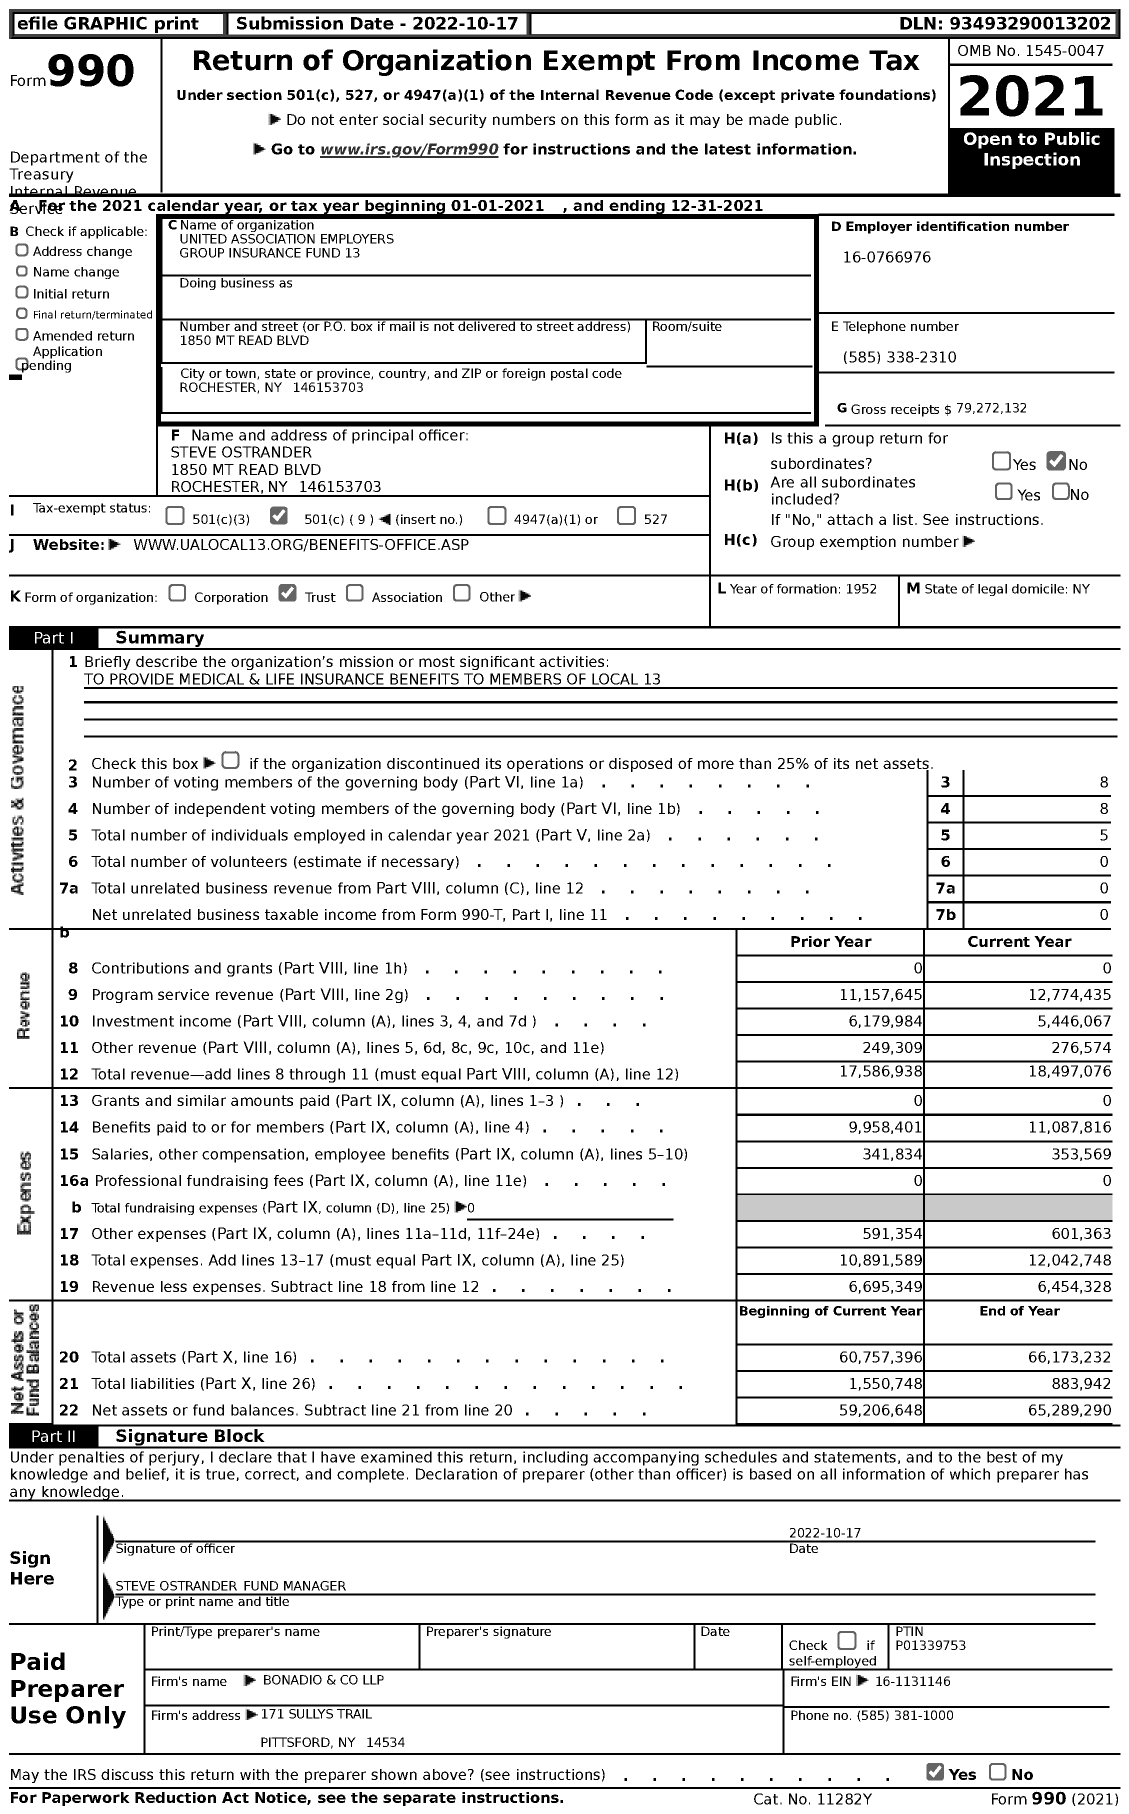 Image of first page of 2021 Form 990 for United Association Employers Group Insurance Fund 13